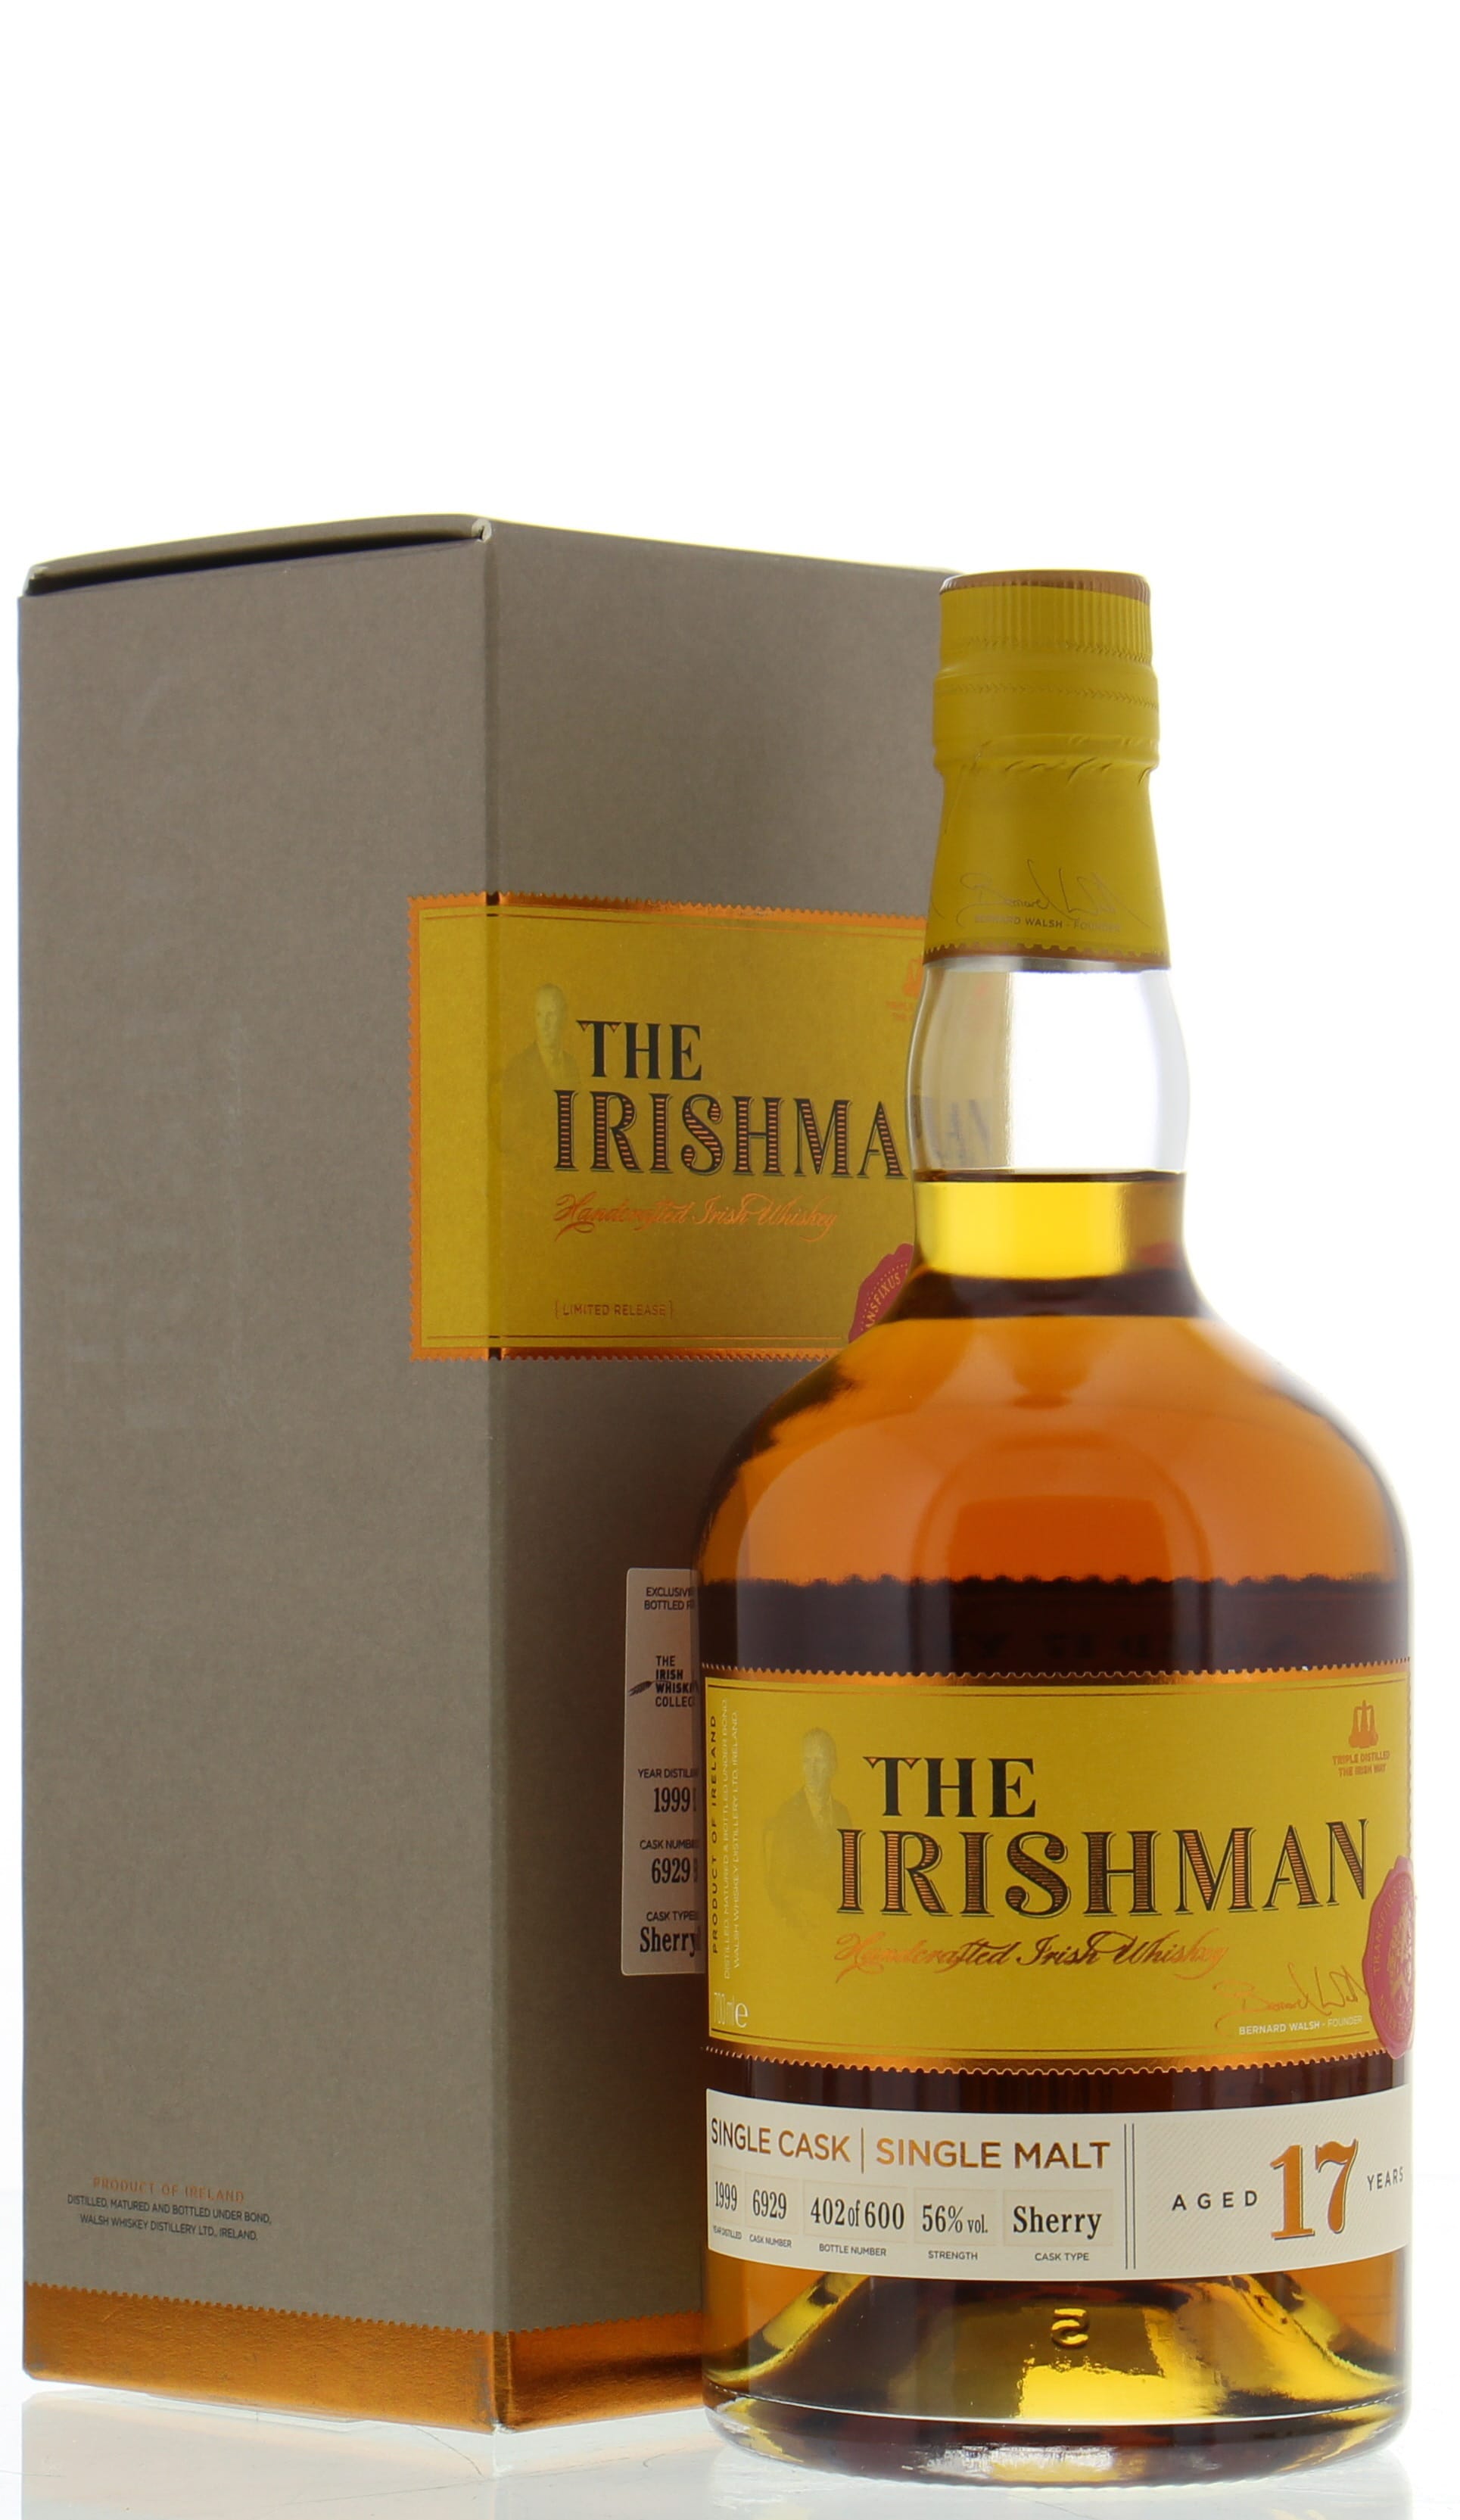 The Irishman - 17 Years Old Sherry Cask:6929 56% 1999 In Original Container